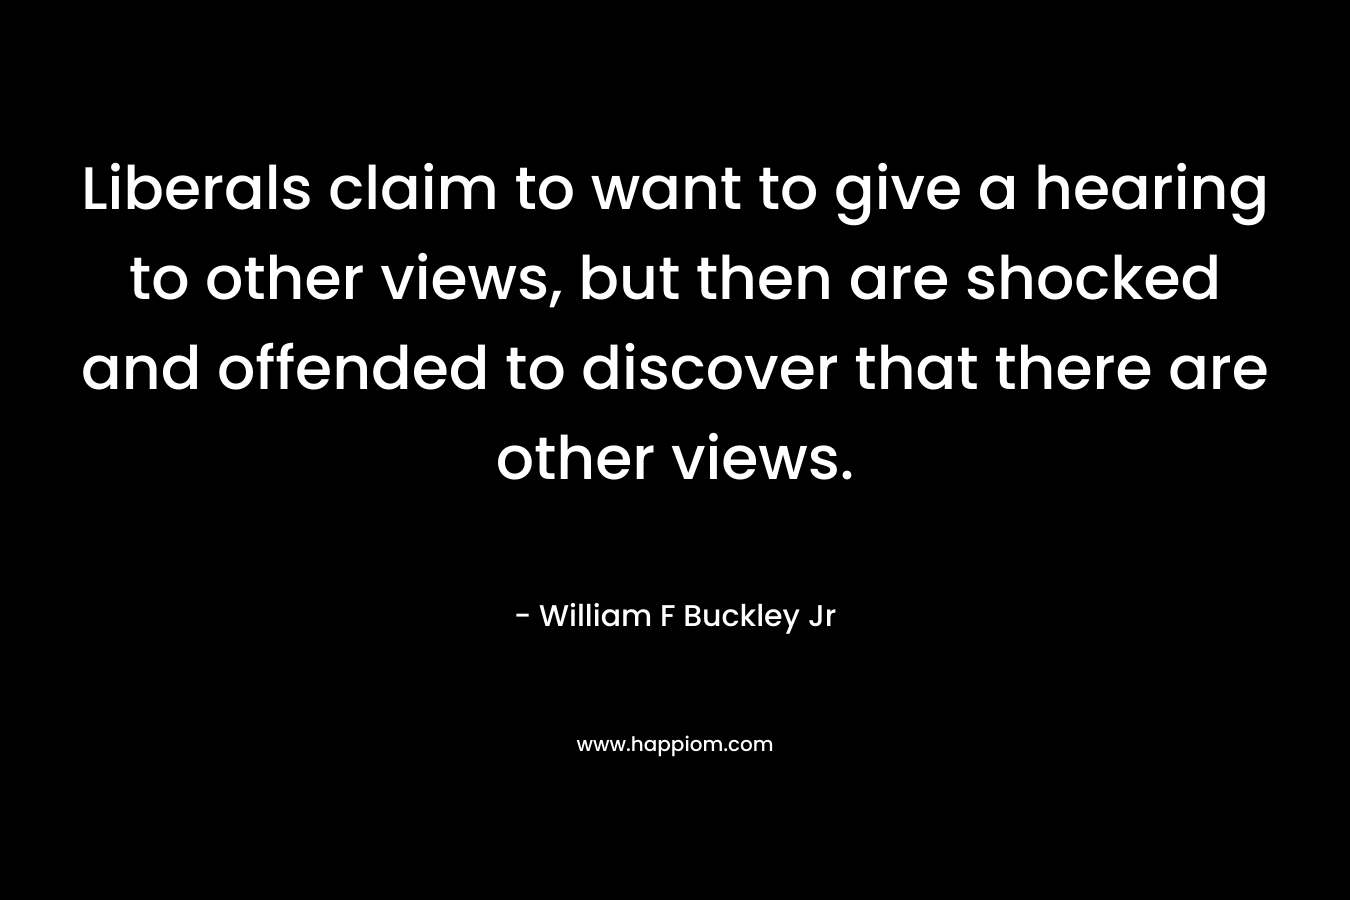 Liberals claim to want to give a hearing to other views, but then are shocked and offended to discover that there are other views.